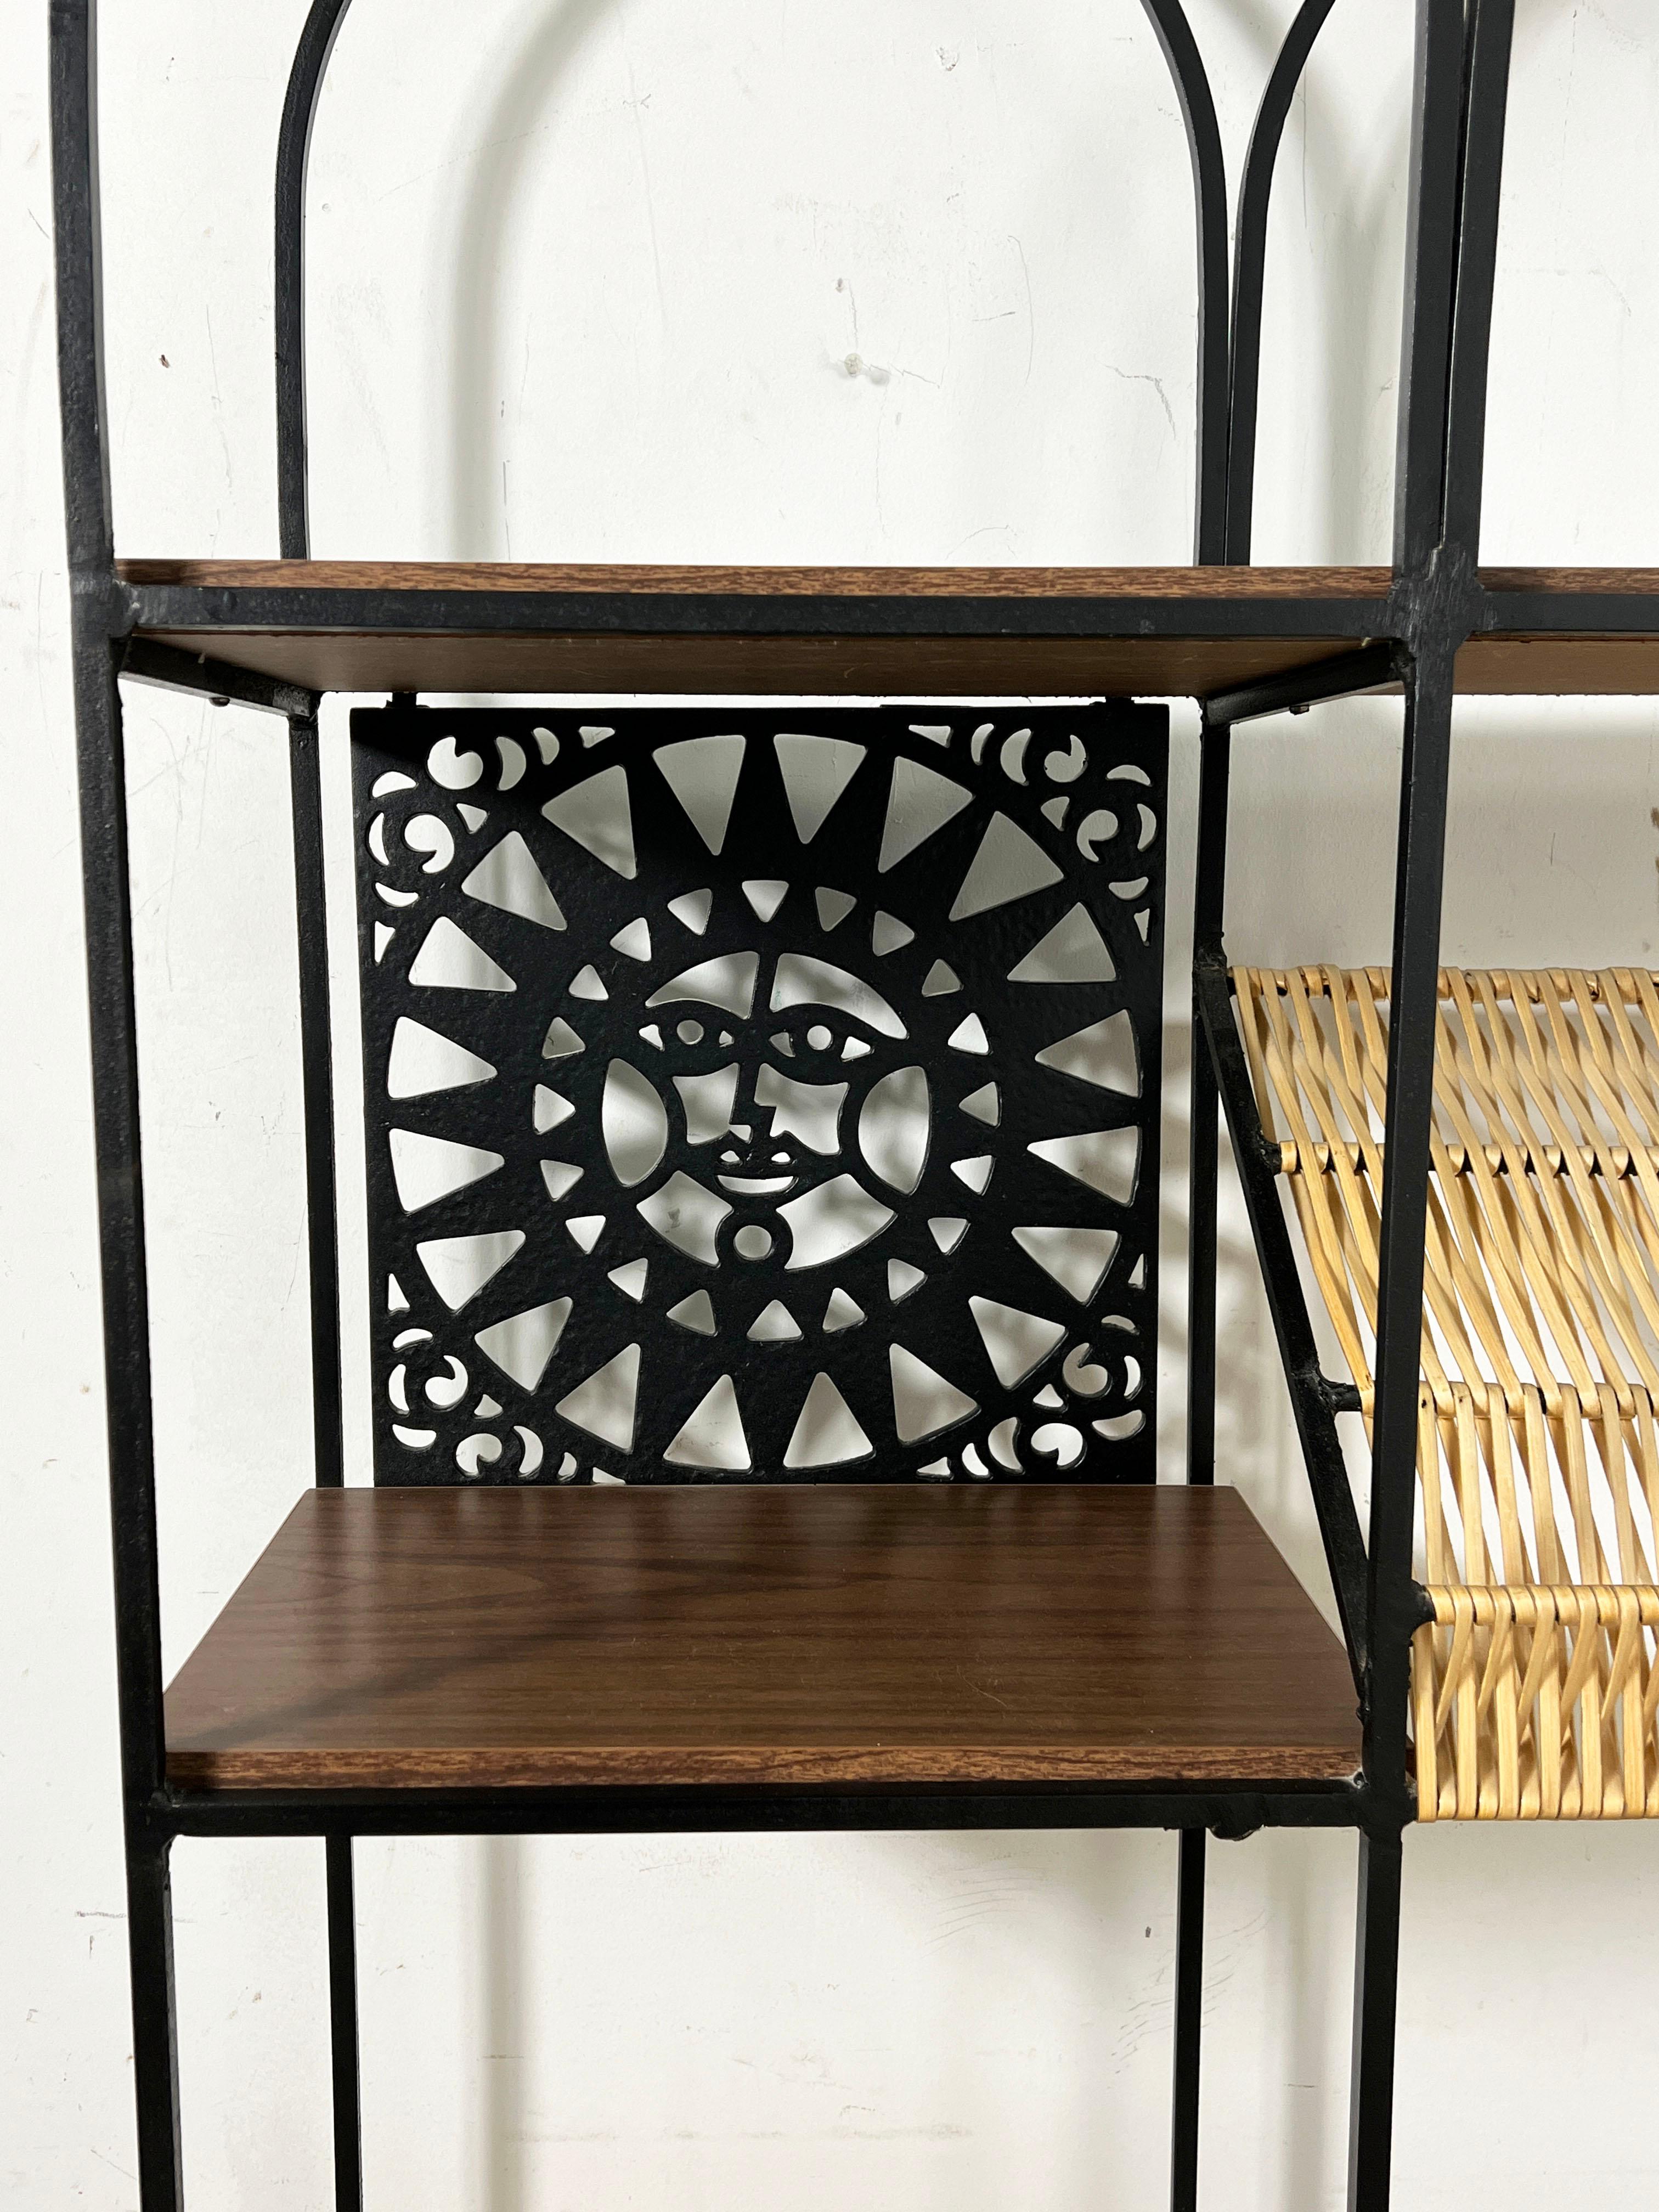 Arched top etagere shelving display unit with woven elements designed by Arthur Umanoff as part of his Mayan collection for Shaver Howard, ca. 1960s.  